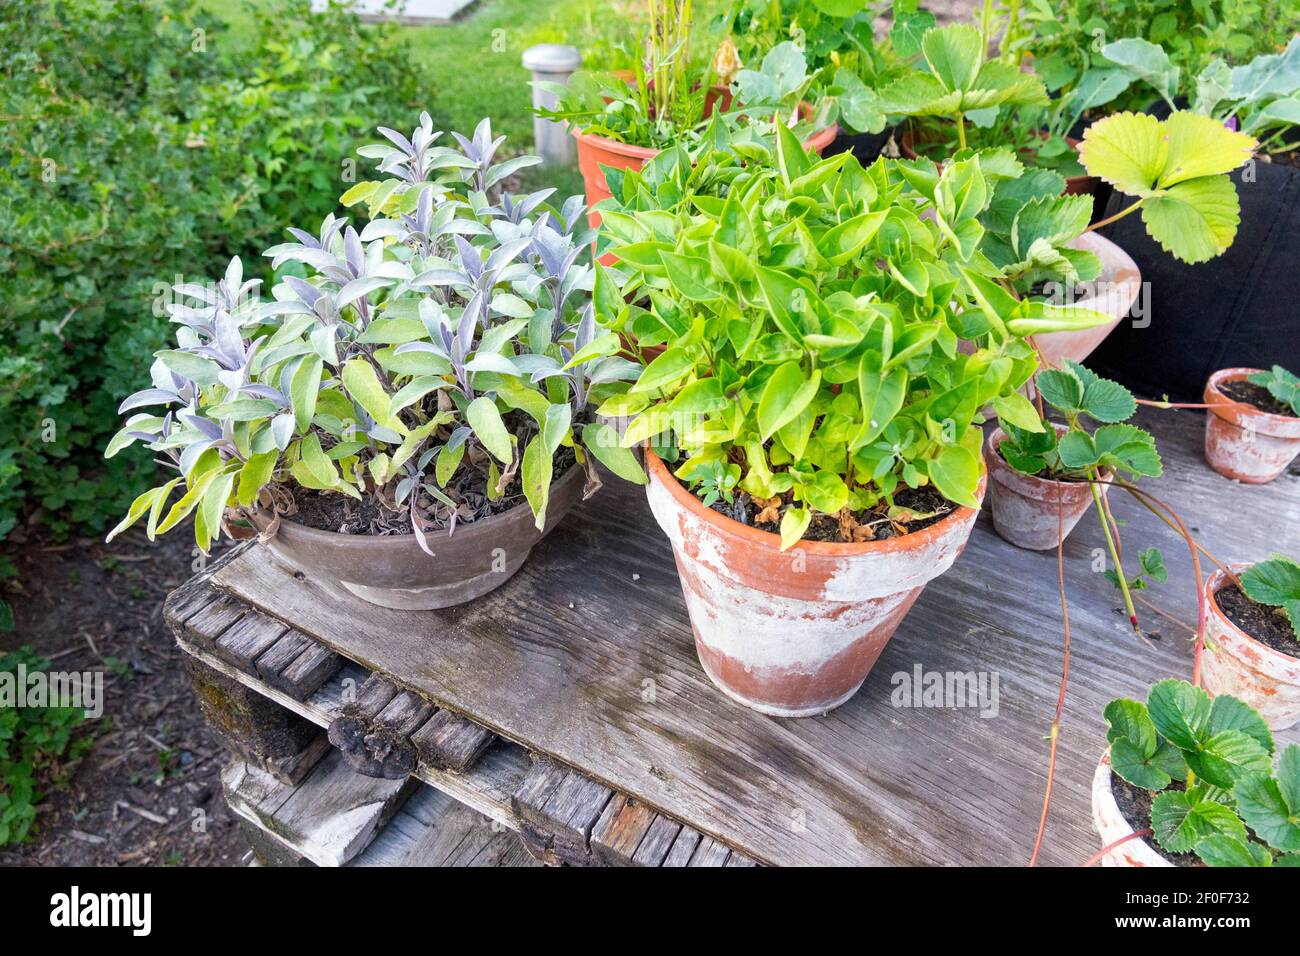 Salvia in pots Culinary herbs Plants in allotment garden Stock Photo